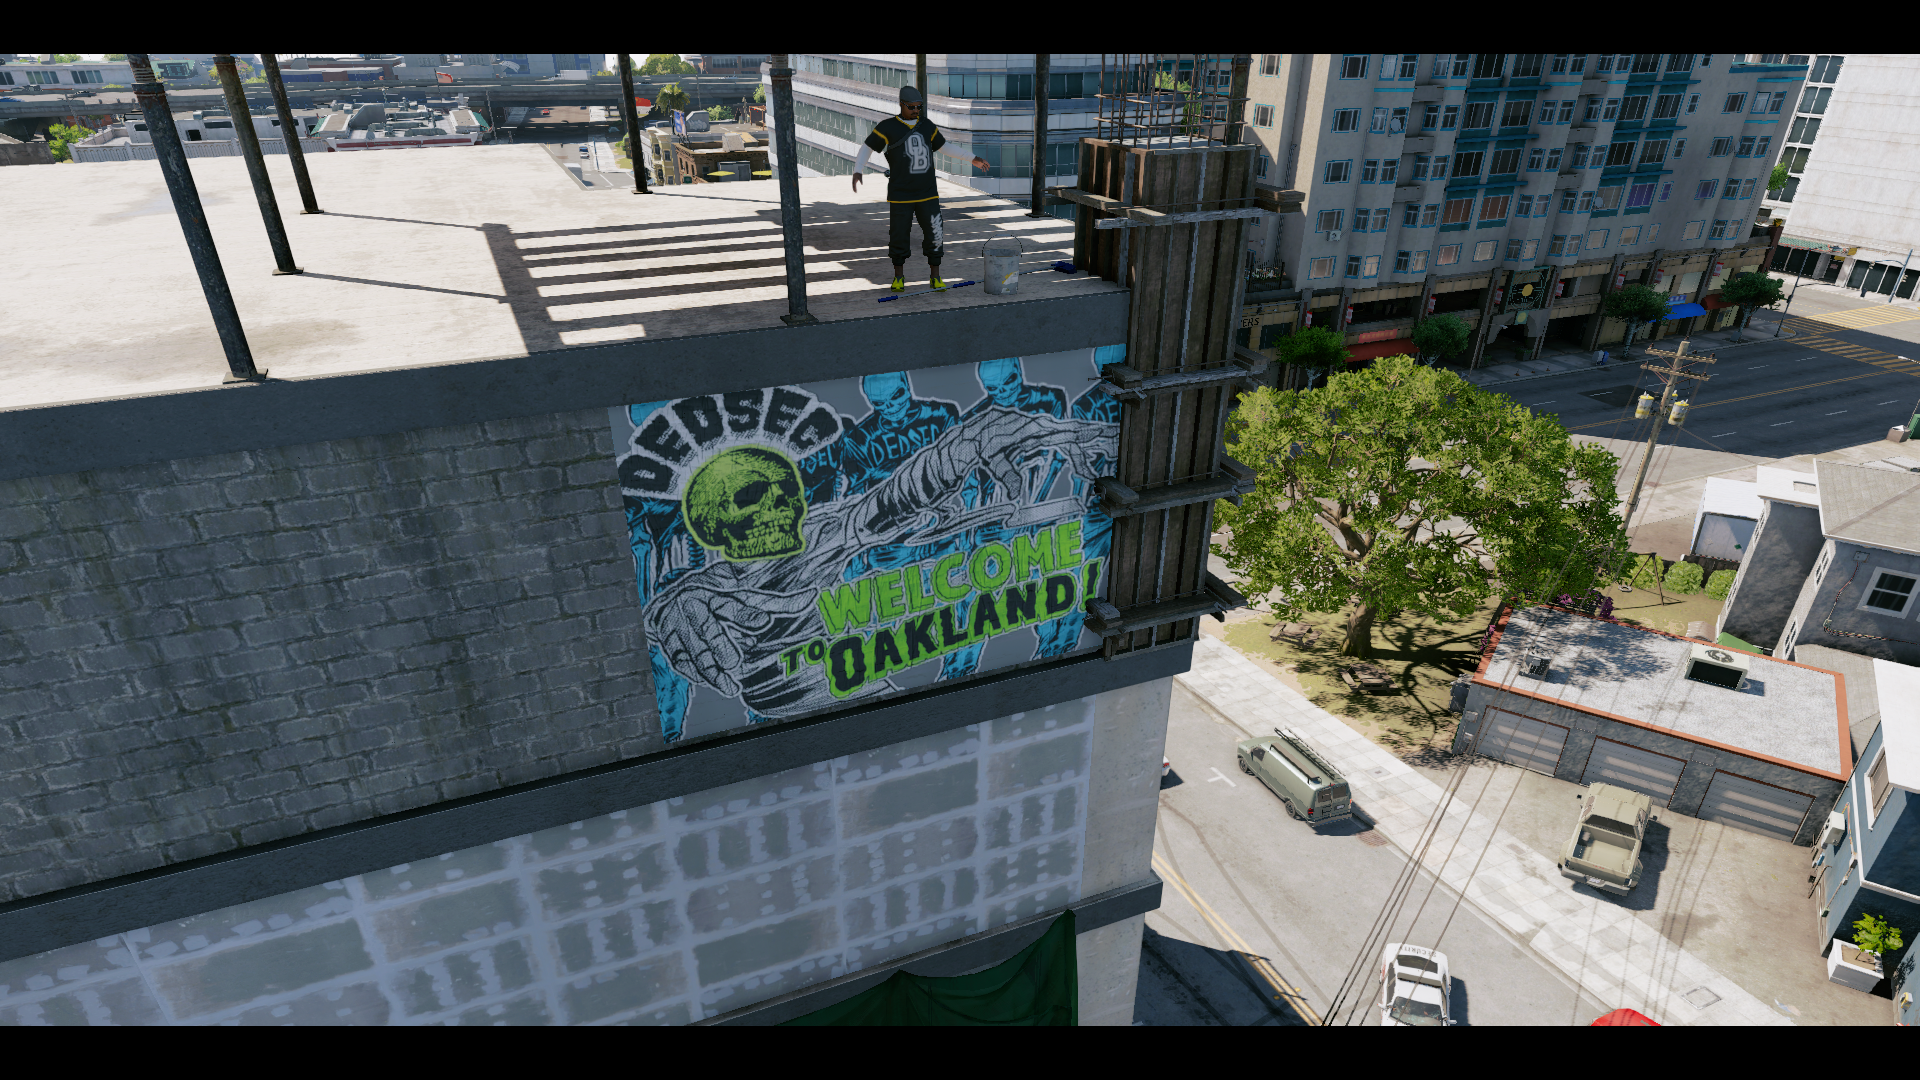 Need some extra vertigo in your life? Watch_Dogs 2 has got your back! Just don't look down...